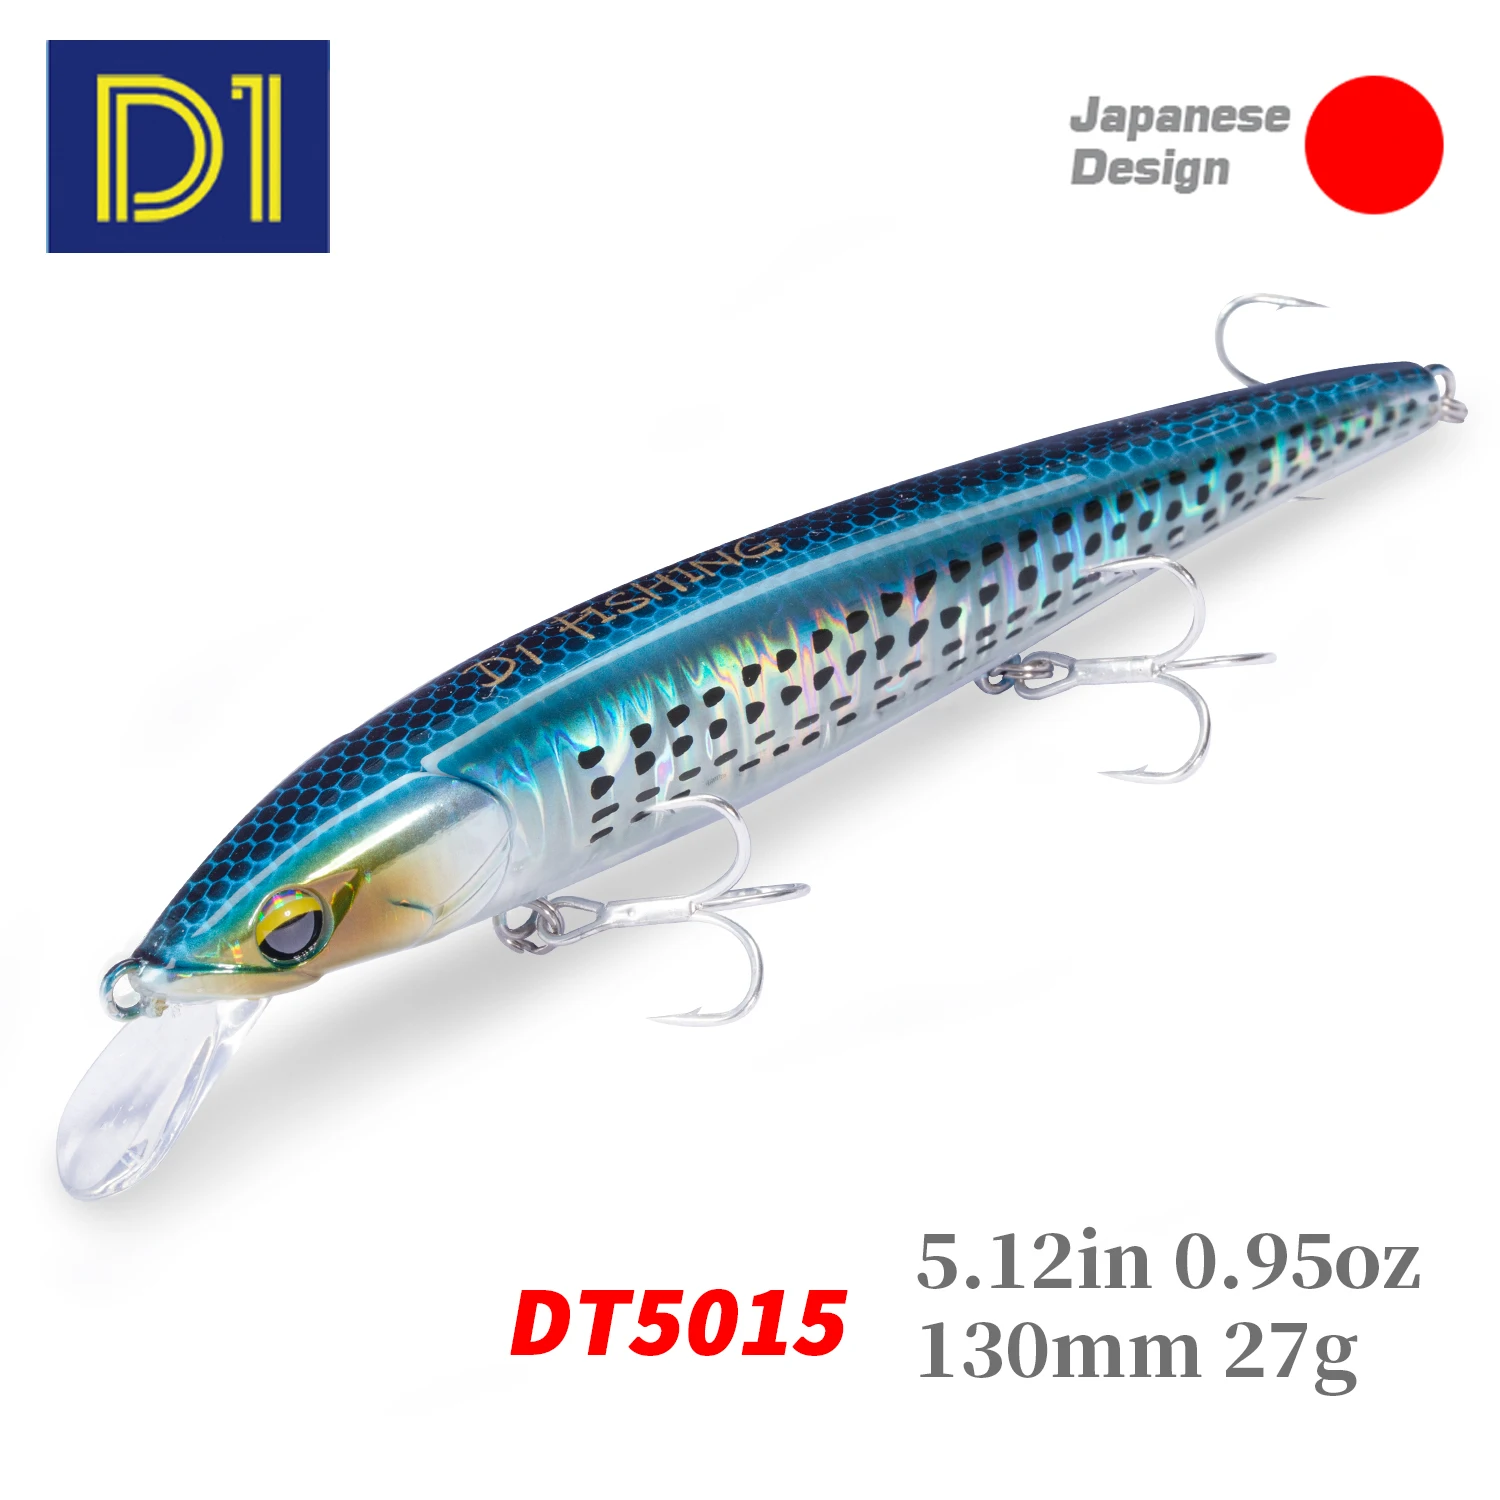 D1 Minnow Lures EJA 130 Sinking 27g Sea Fishing Hard Artificial Wobblers Depth 40-70cm Long Casting Jerkbait 2021 pescar Tackle d1 heavy minnow fishing lures 92mm 49g 110mm 60g sinking artificial laser hard wobblers baits for seabass fishing tackle dt5005